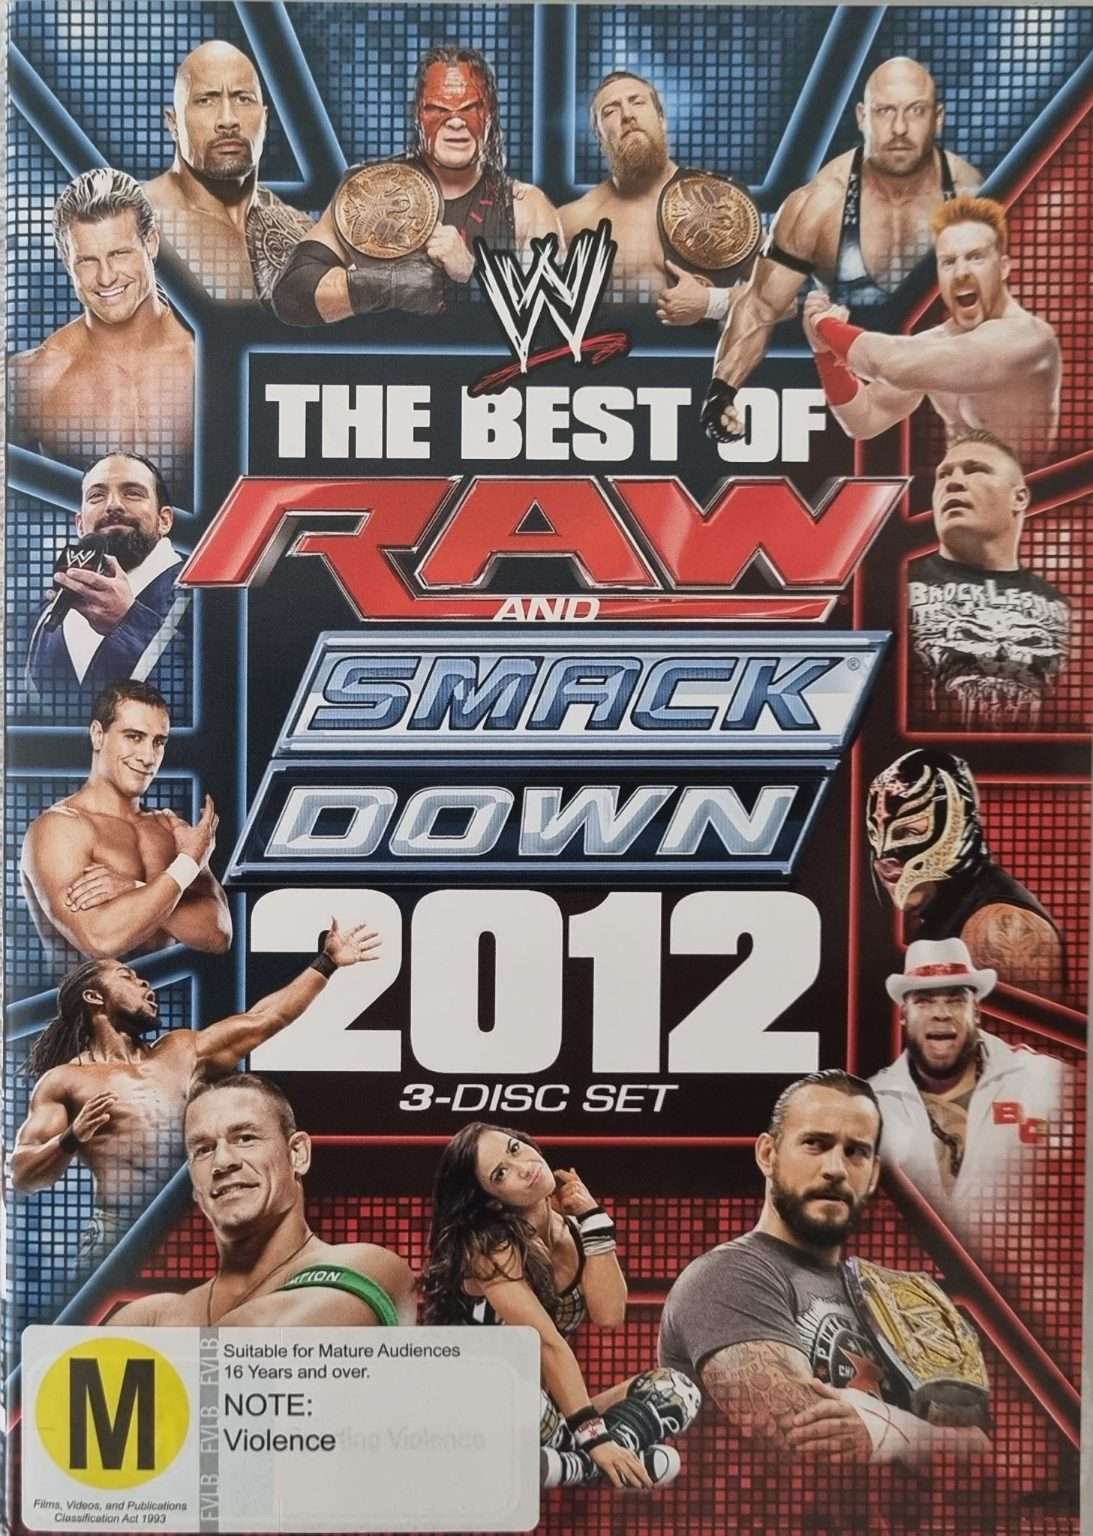 WWE: The Best of Raw and Smackdown 2012 3 Disc